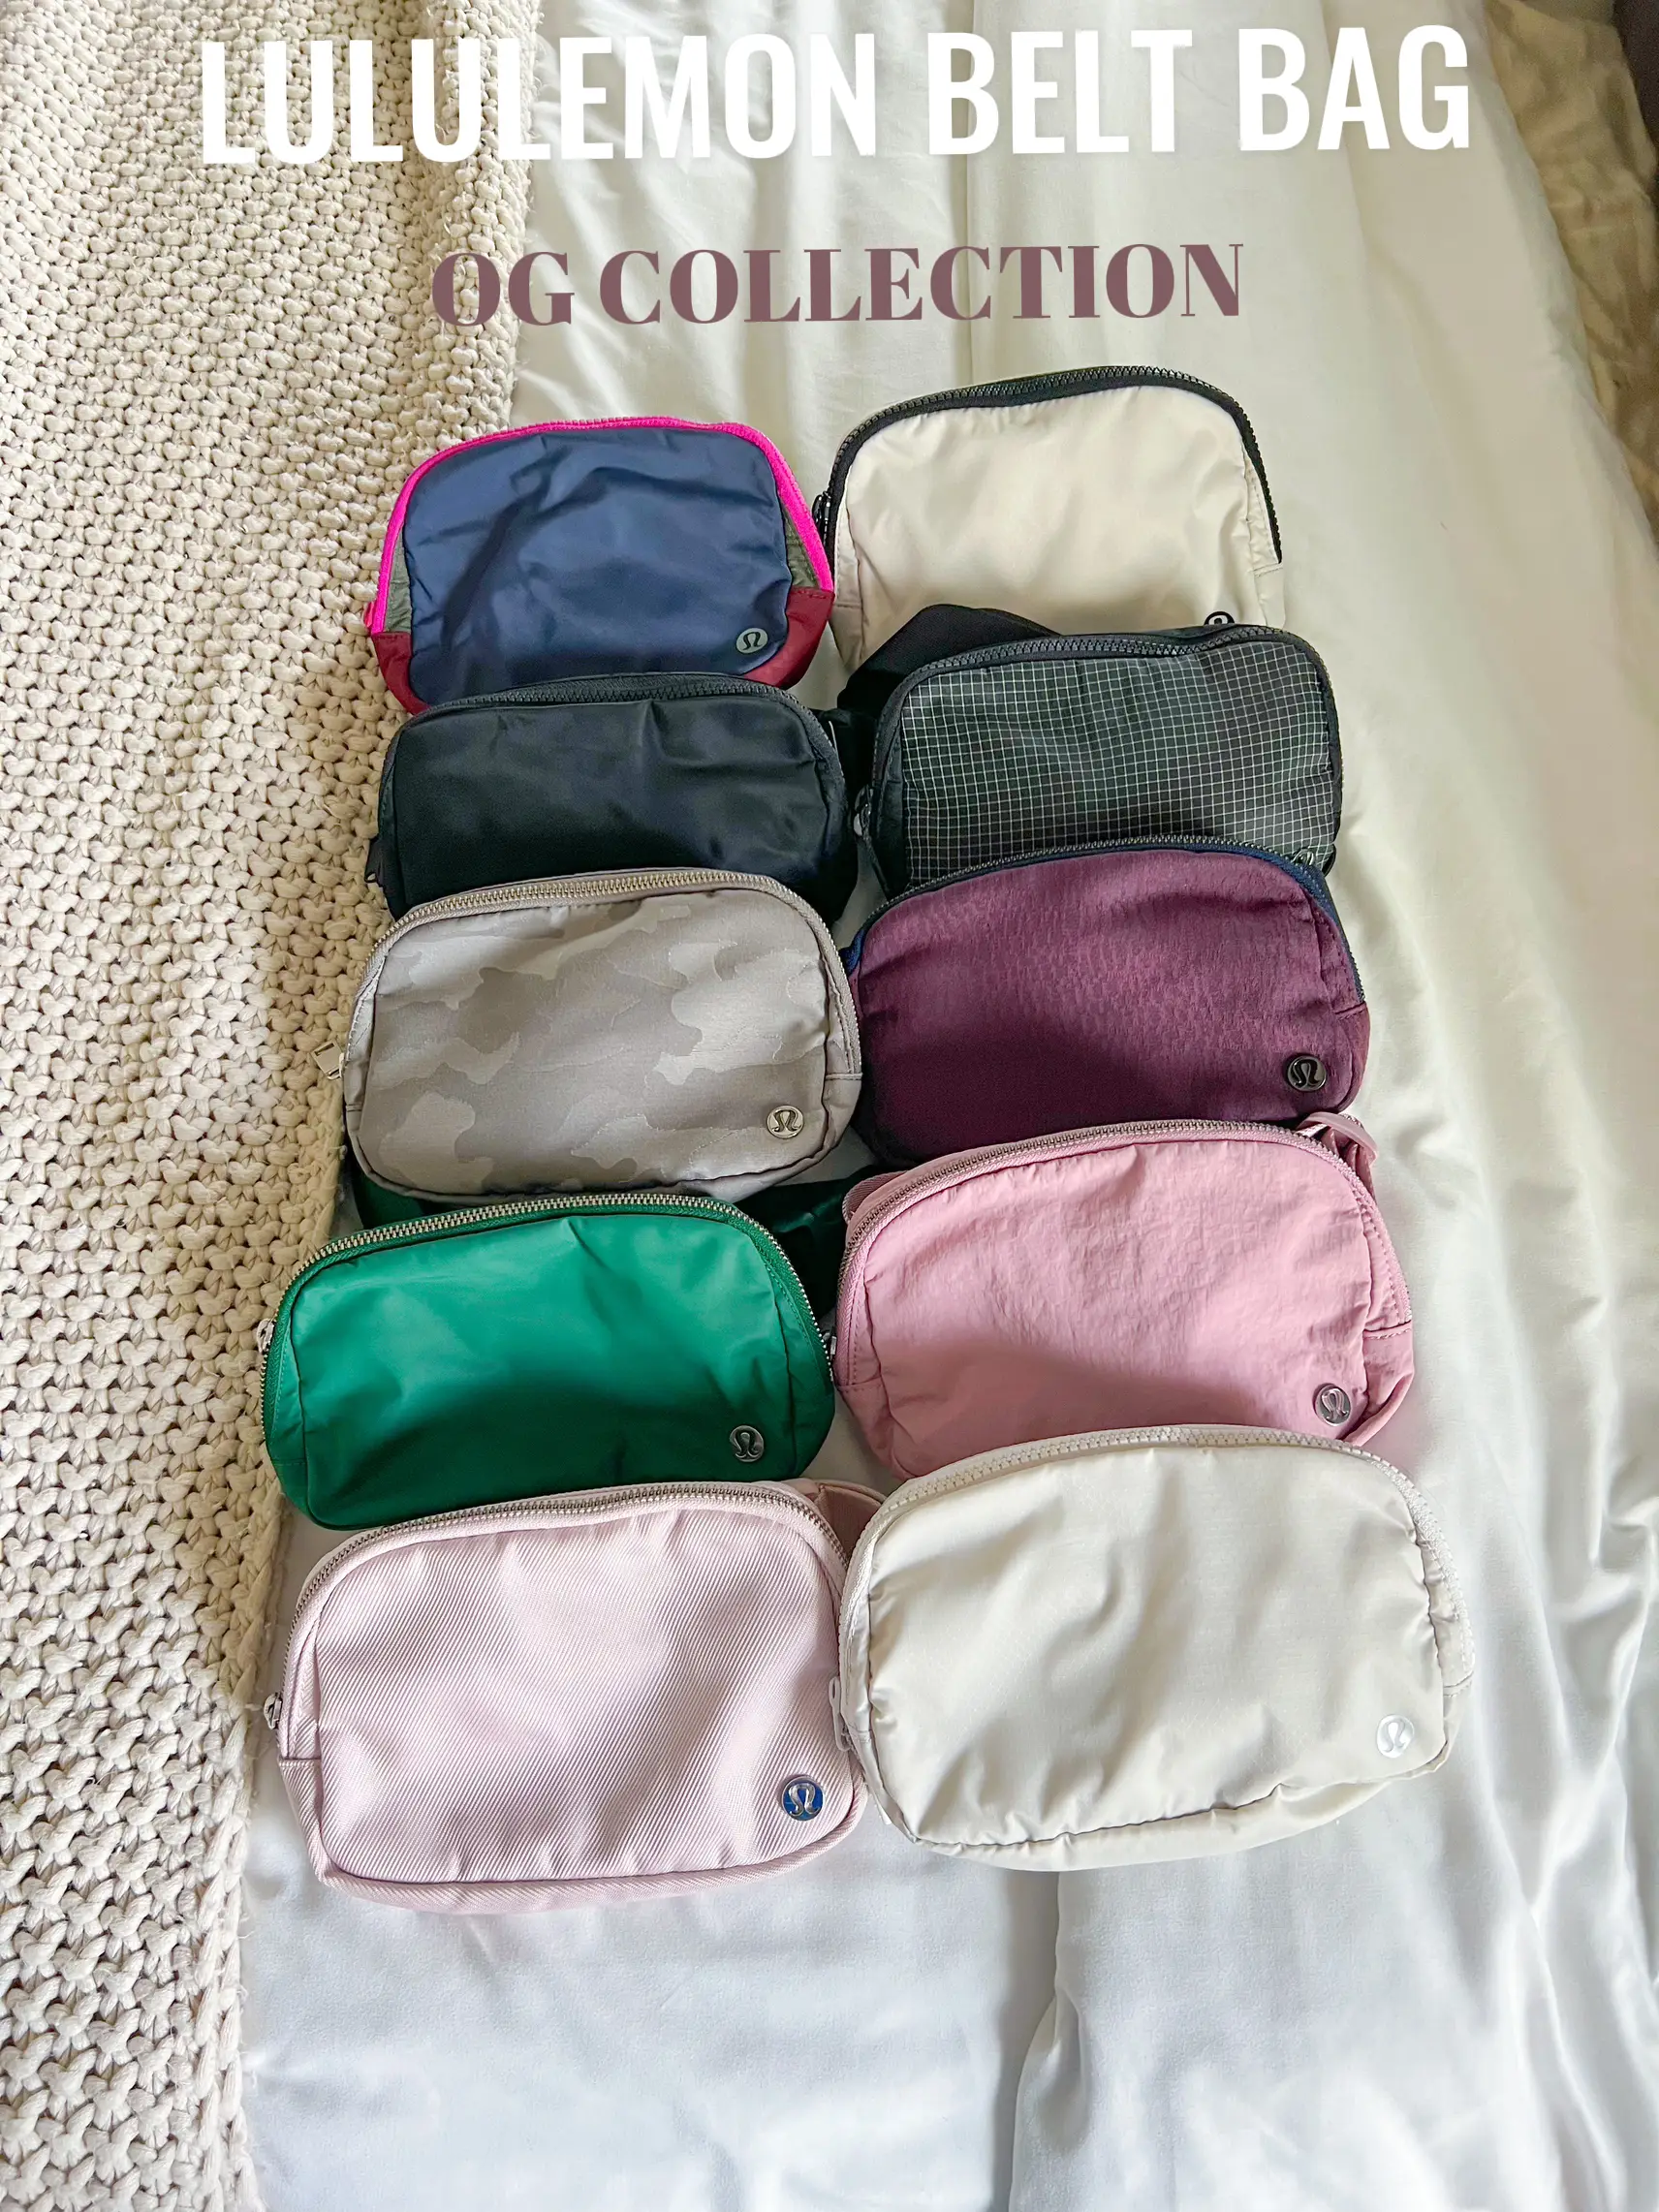 Sonic Pink Everywhere Belt Bag from Lululemon, Gallery posted by liz9574